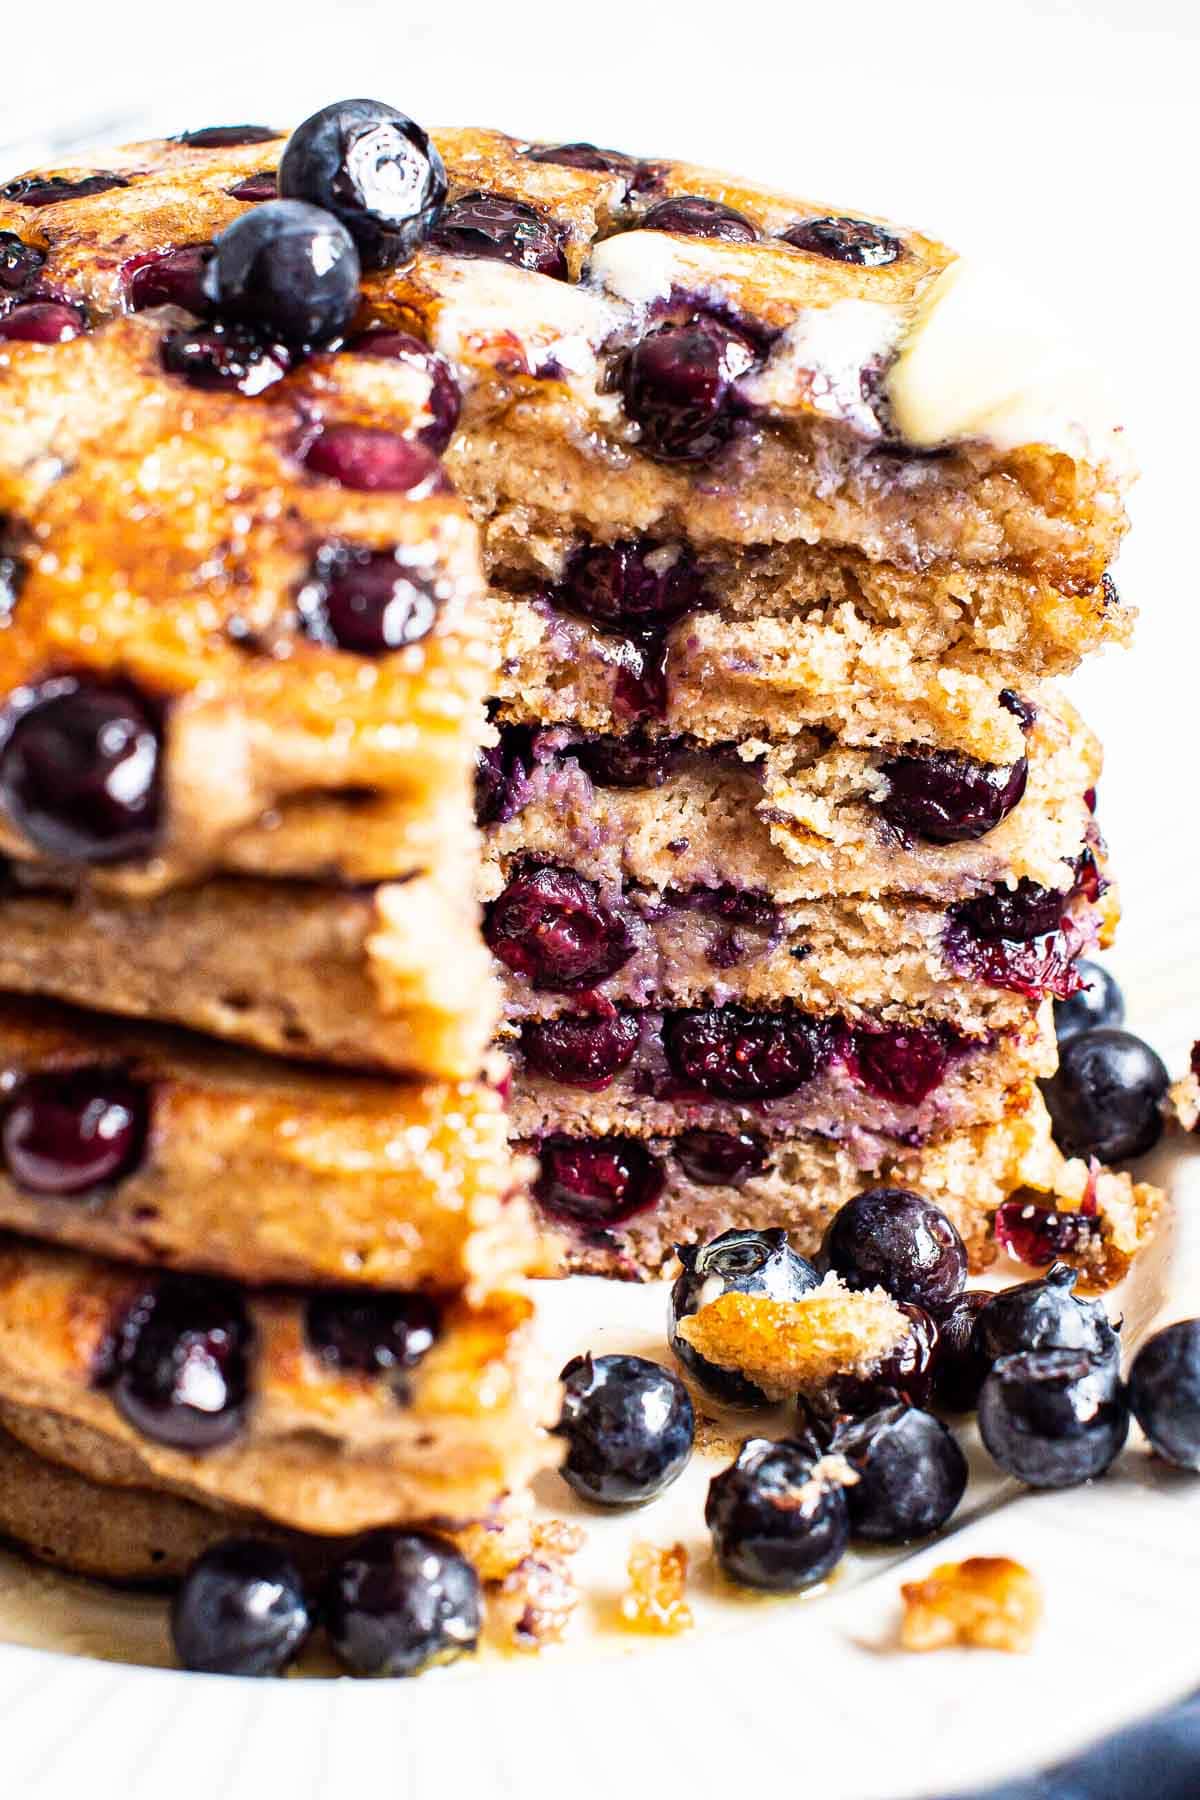 A stack of healthy blueberry pancakes cut and showing texture inside.